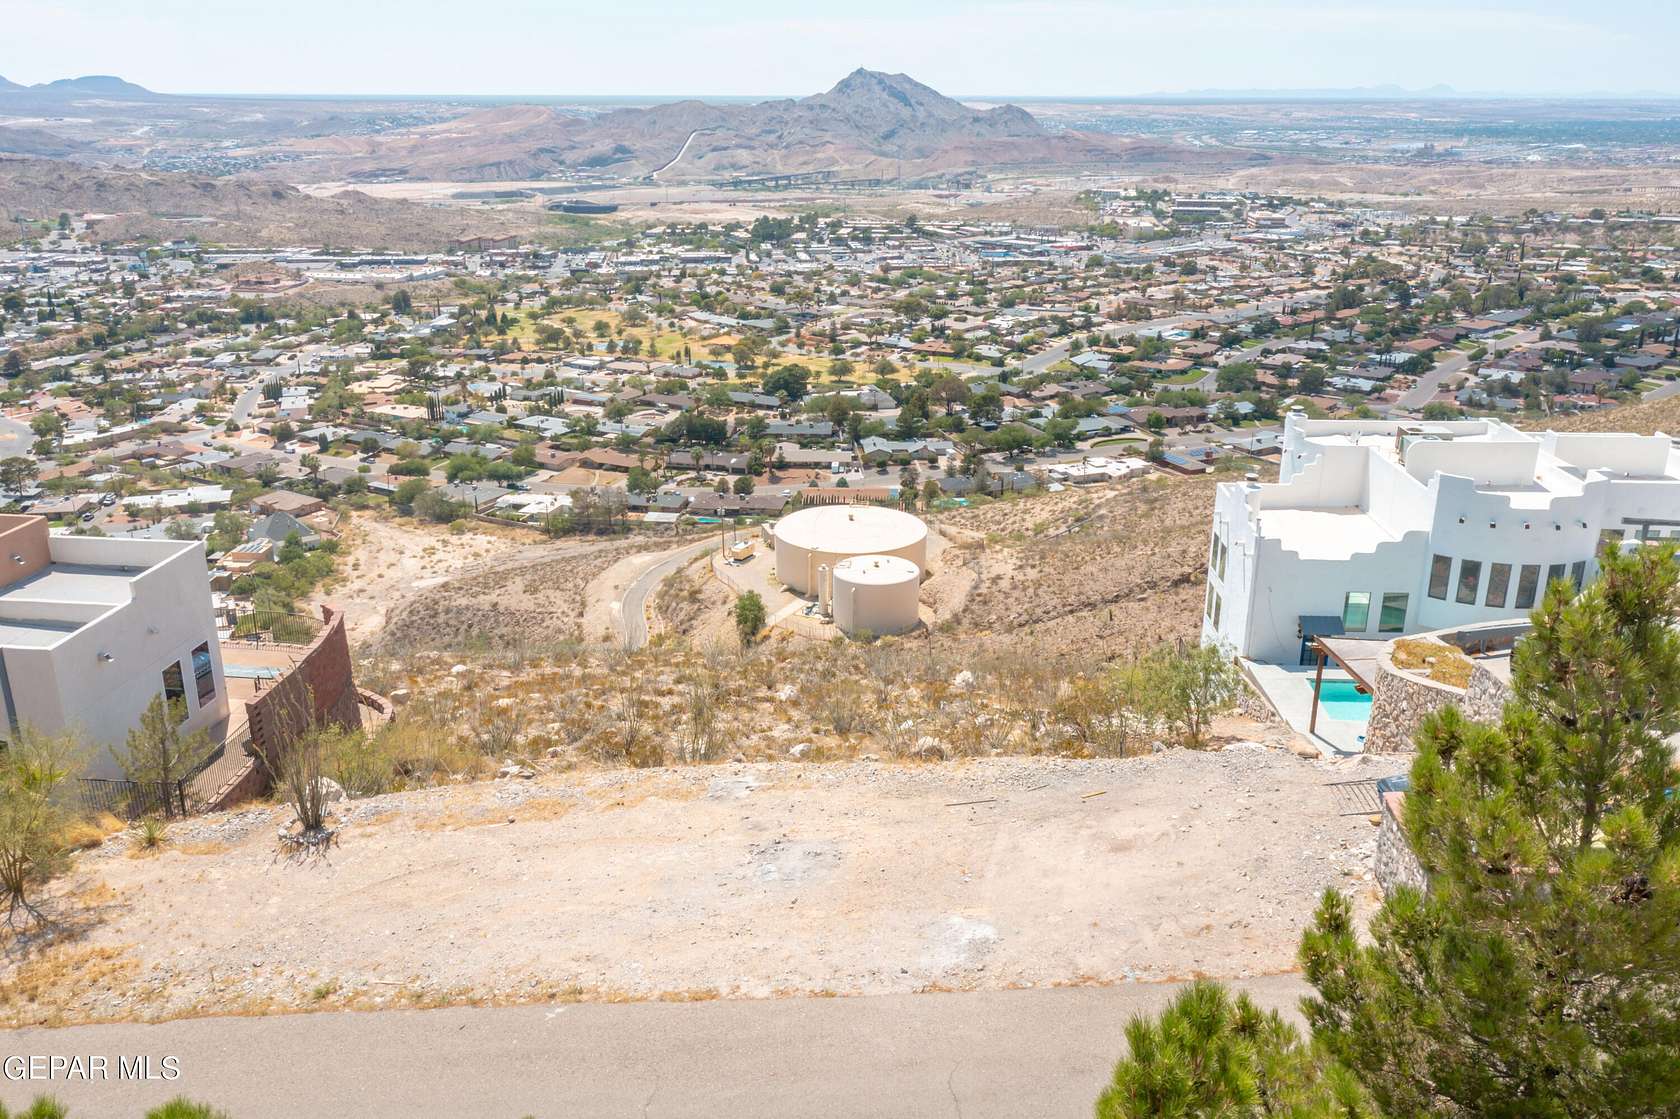 0.22 Acres of Residential Land for Sale in El Paso, Texas